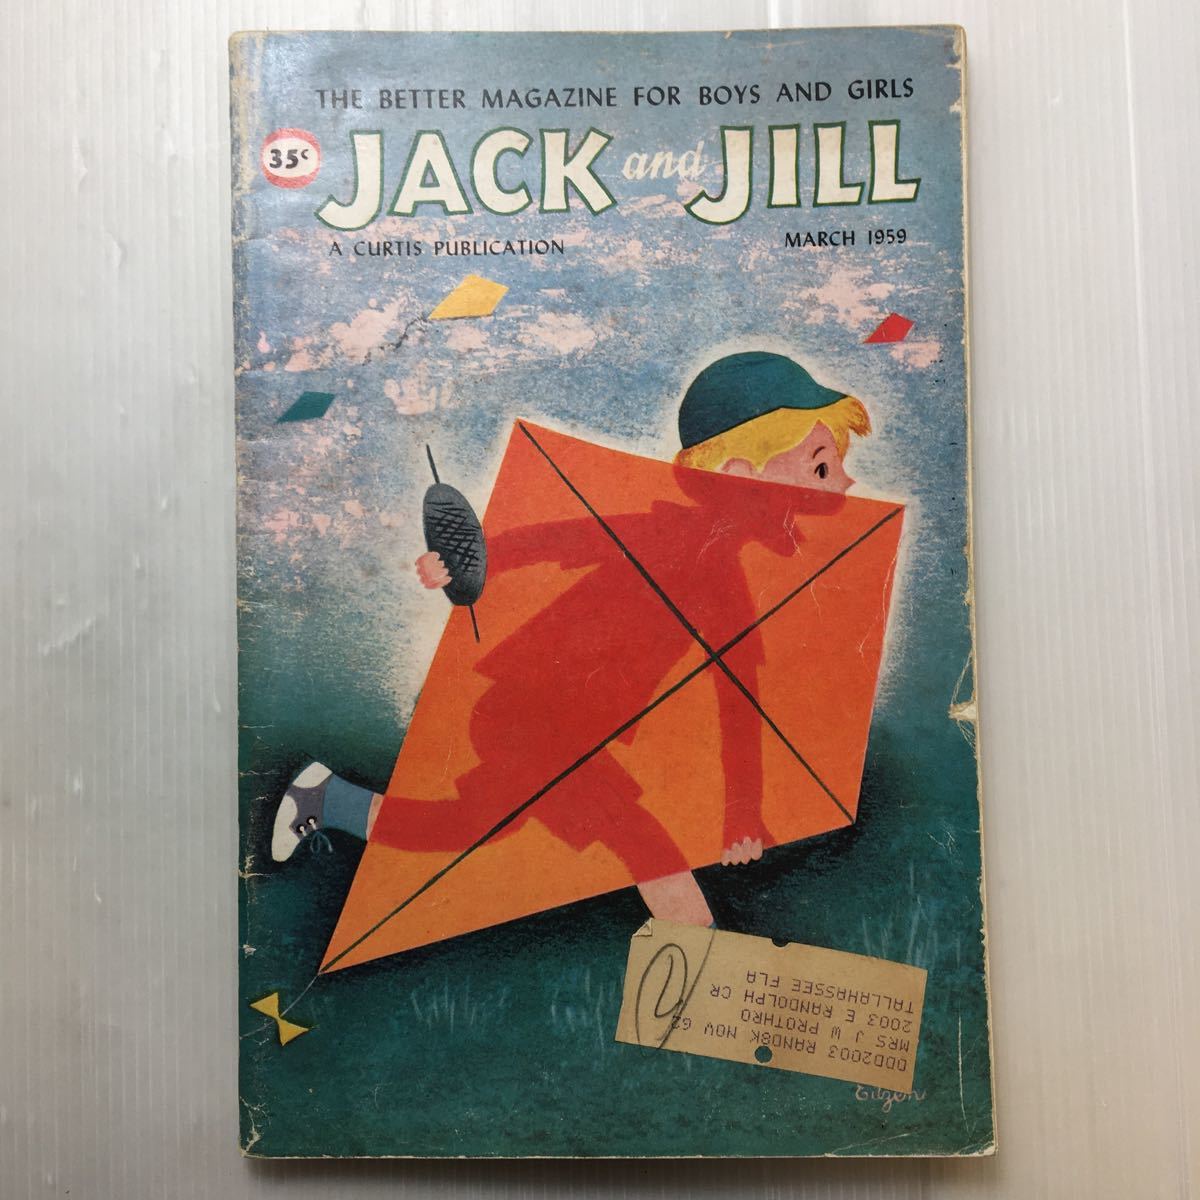 zaa-179♪JACK and JILL(THE BETTER MAGAZINE FOR BOY AND GIRLS) A CURTIS PUBLICATION (MARCH 1959)